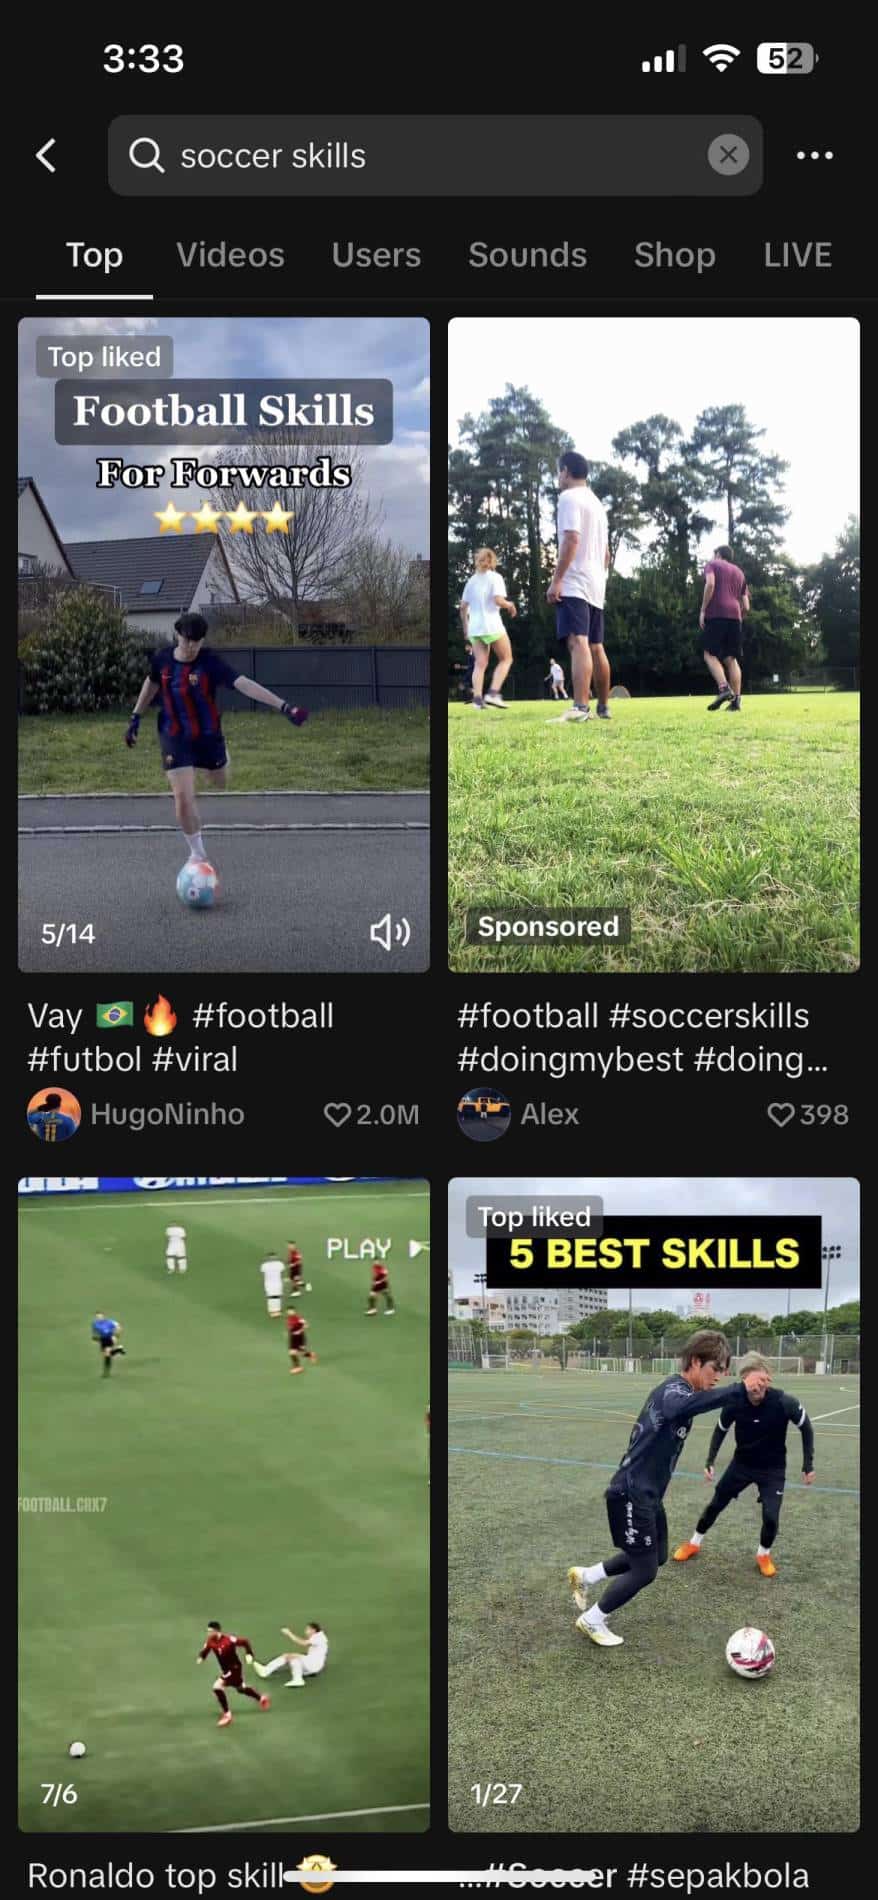 Search results page for "soccer skills" in the TikTok app.